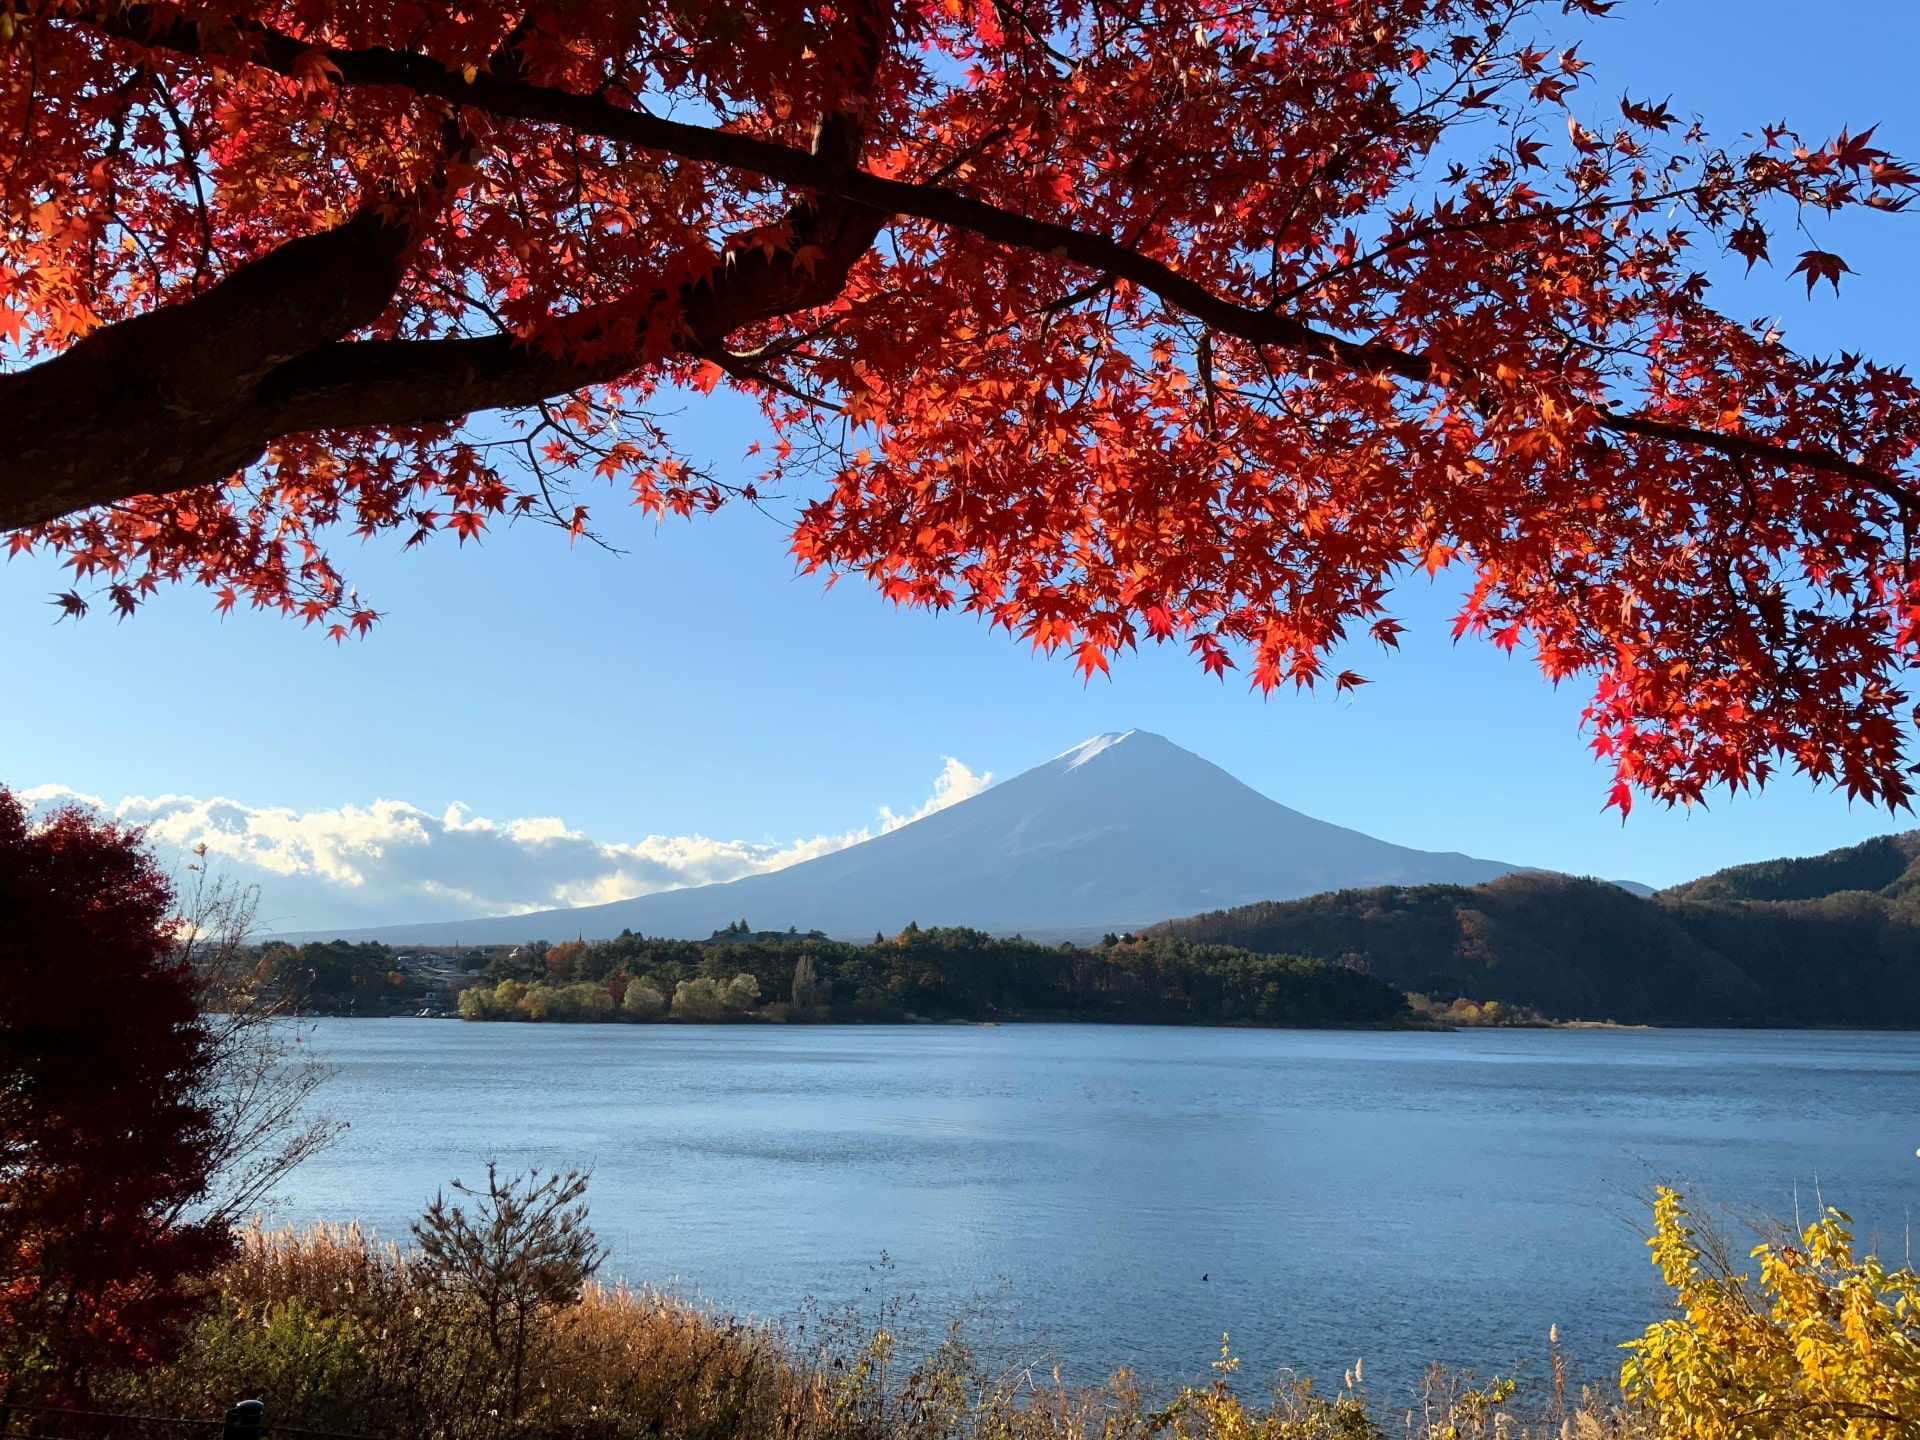 Mt Fuji with Maple leaves in autumn